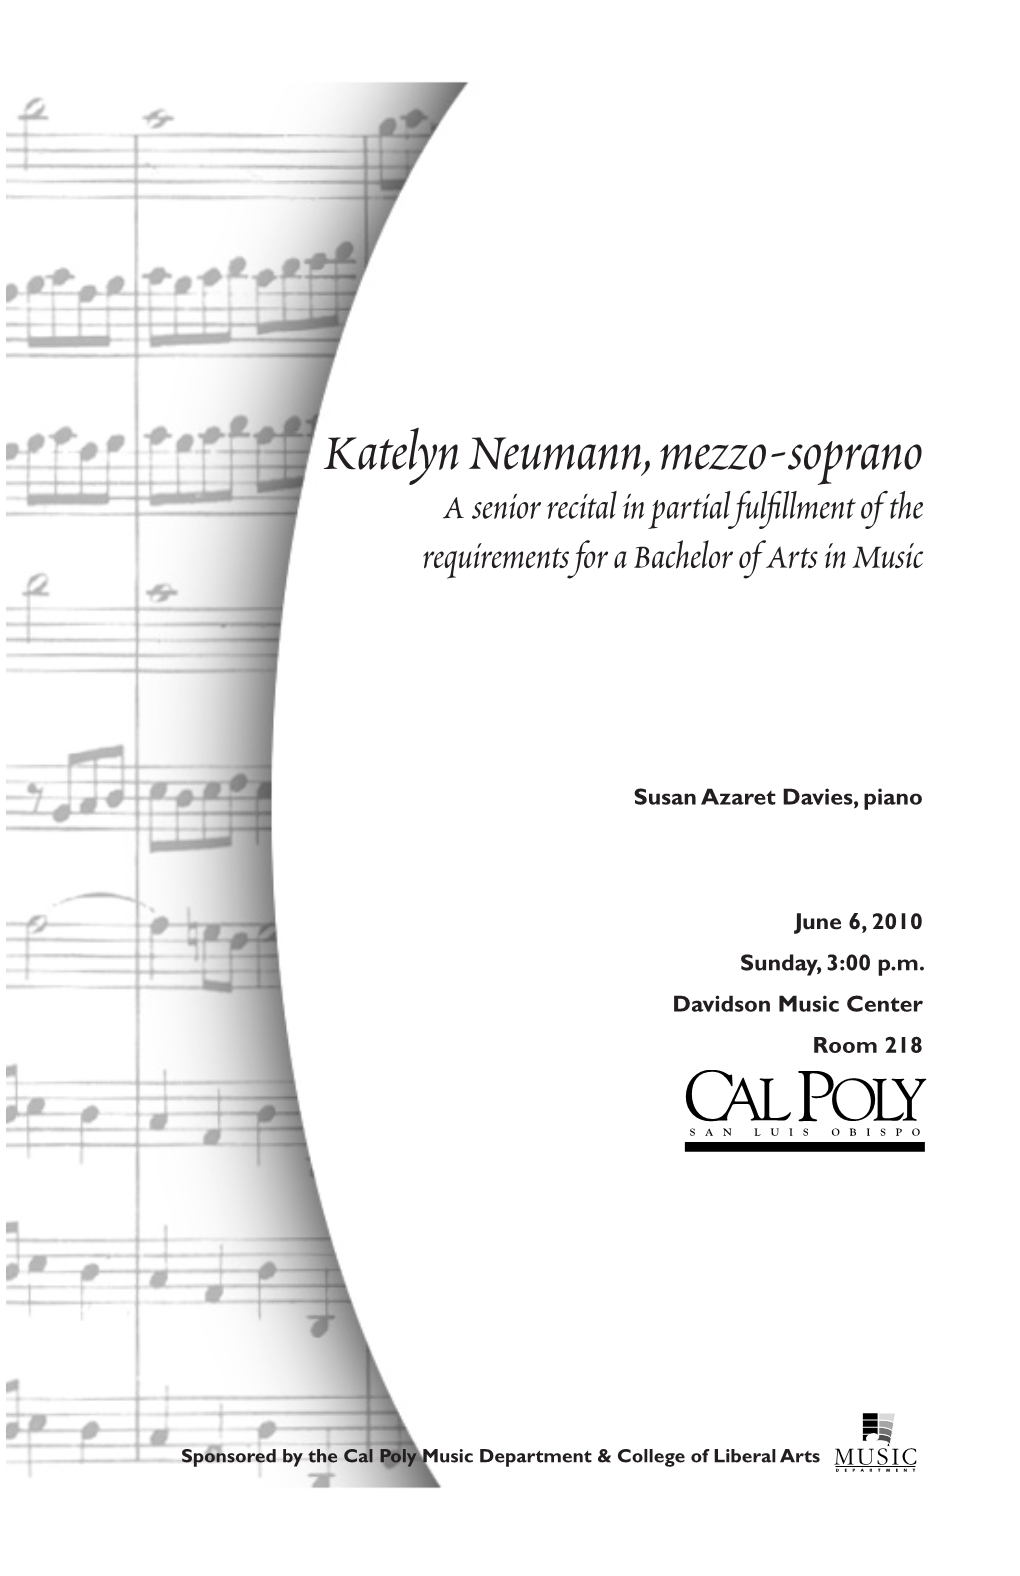 Katelyn Neumann, Mezzo-Soprano a Senior Recital in Partial Fulfillment of the Requirements for a Bachelor of Arts in Music